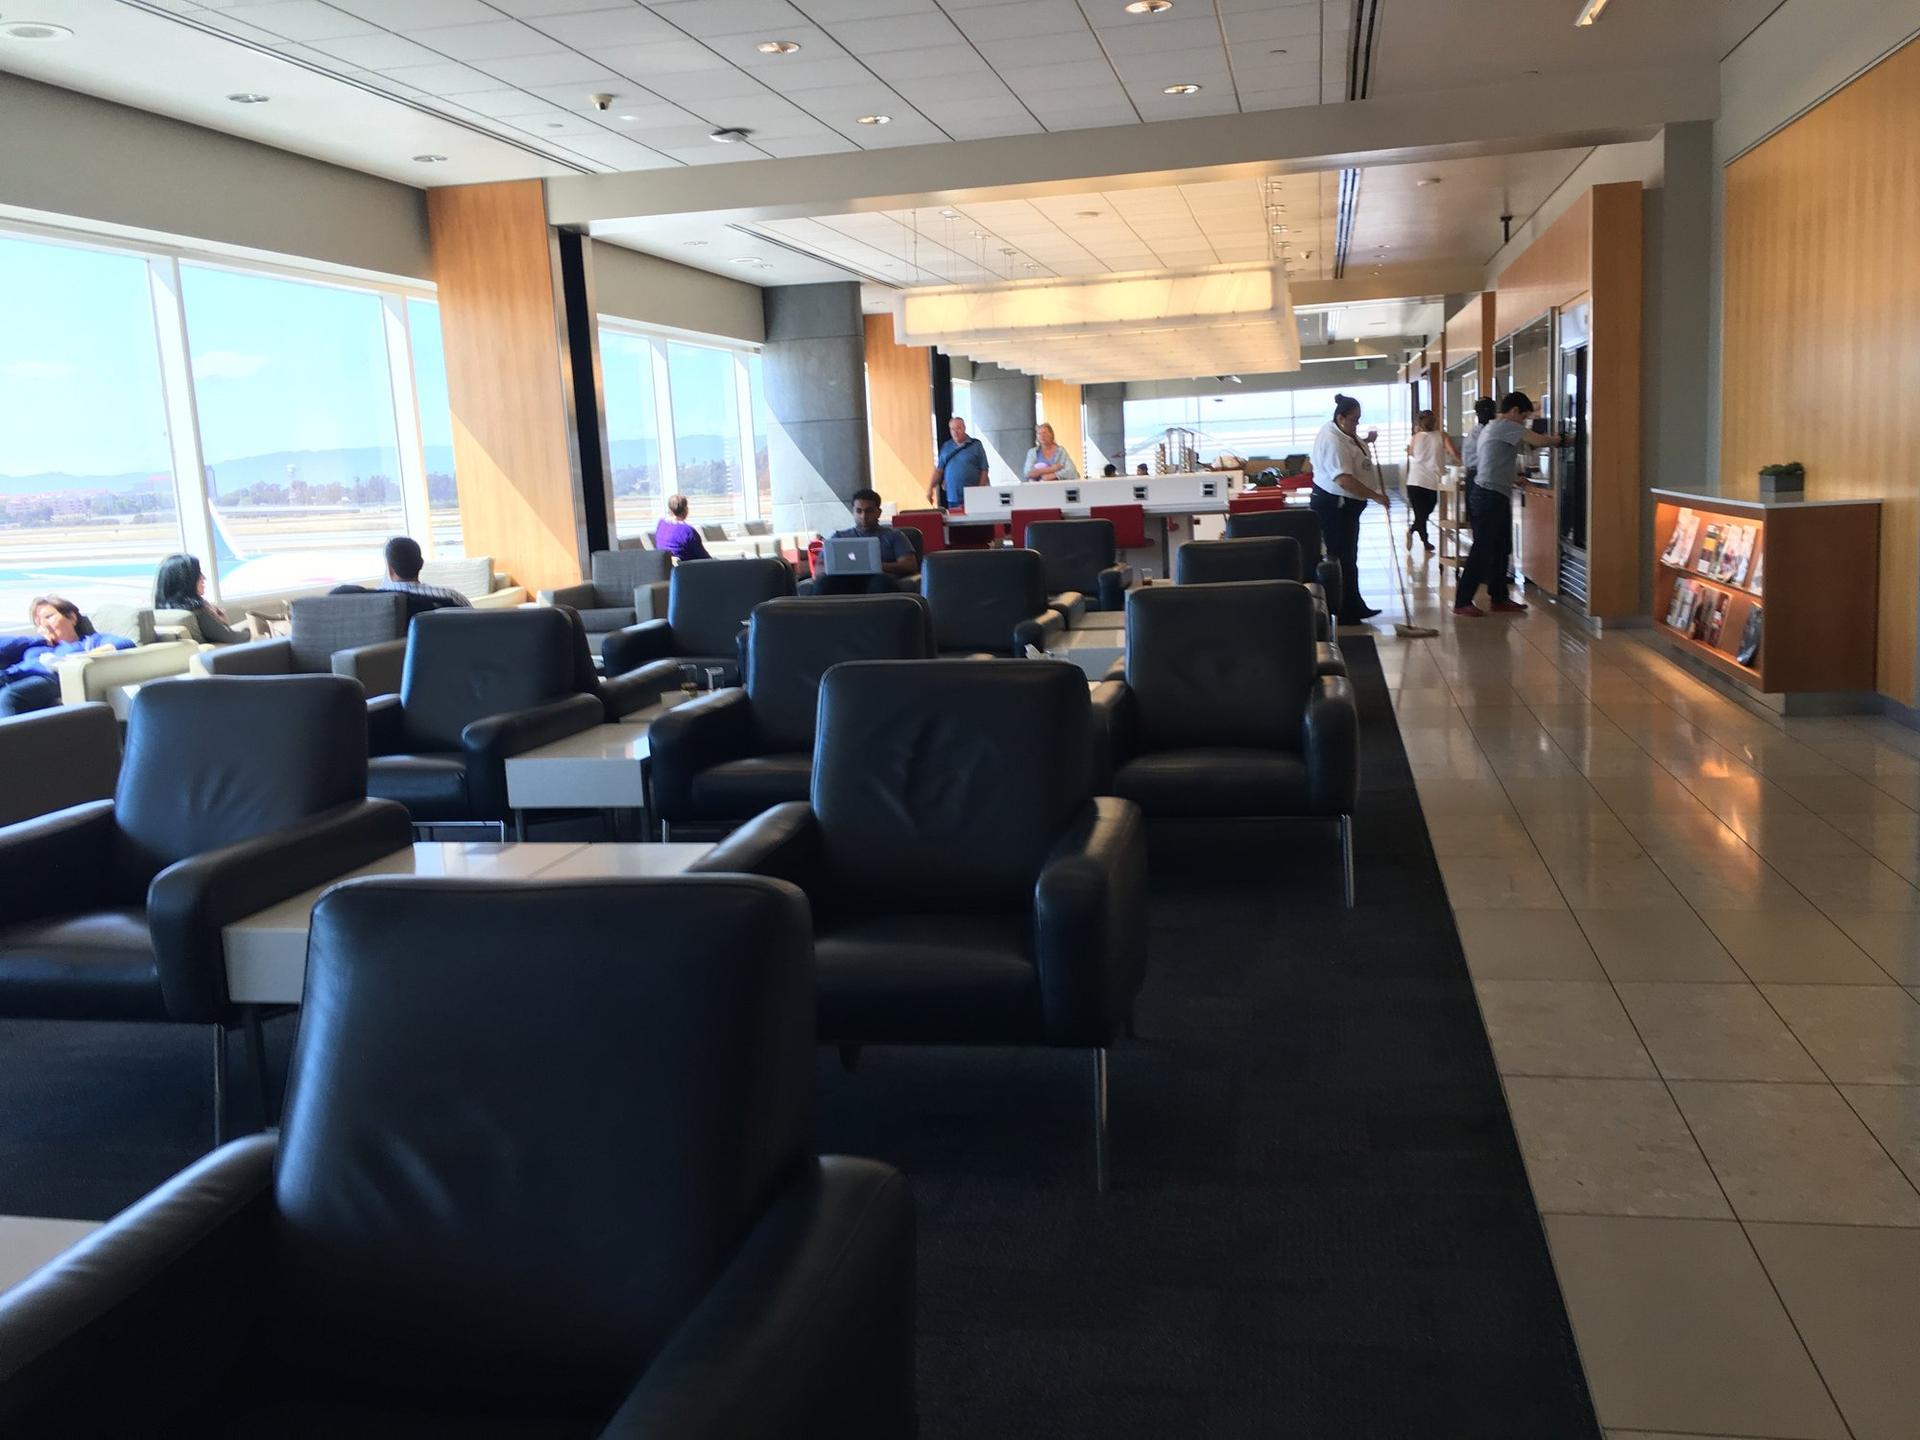 Air Canada Maple Leaf Lounge image 15 of 24